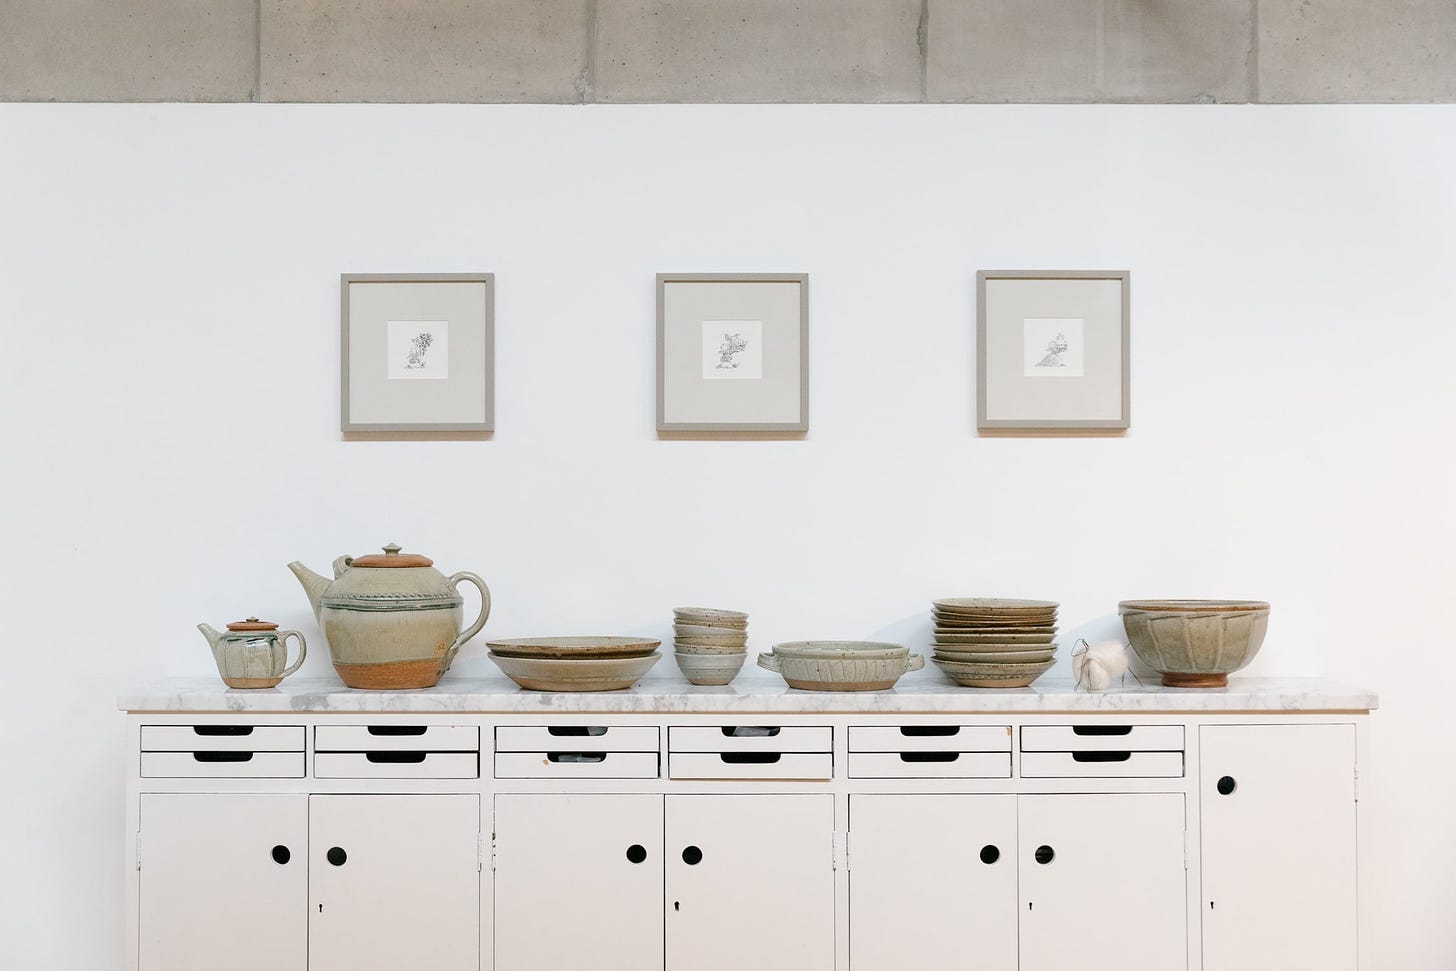 A large sideboard with stoneware pottery piled in a row. Three square picture frames spaced equally above.